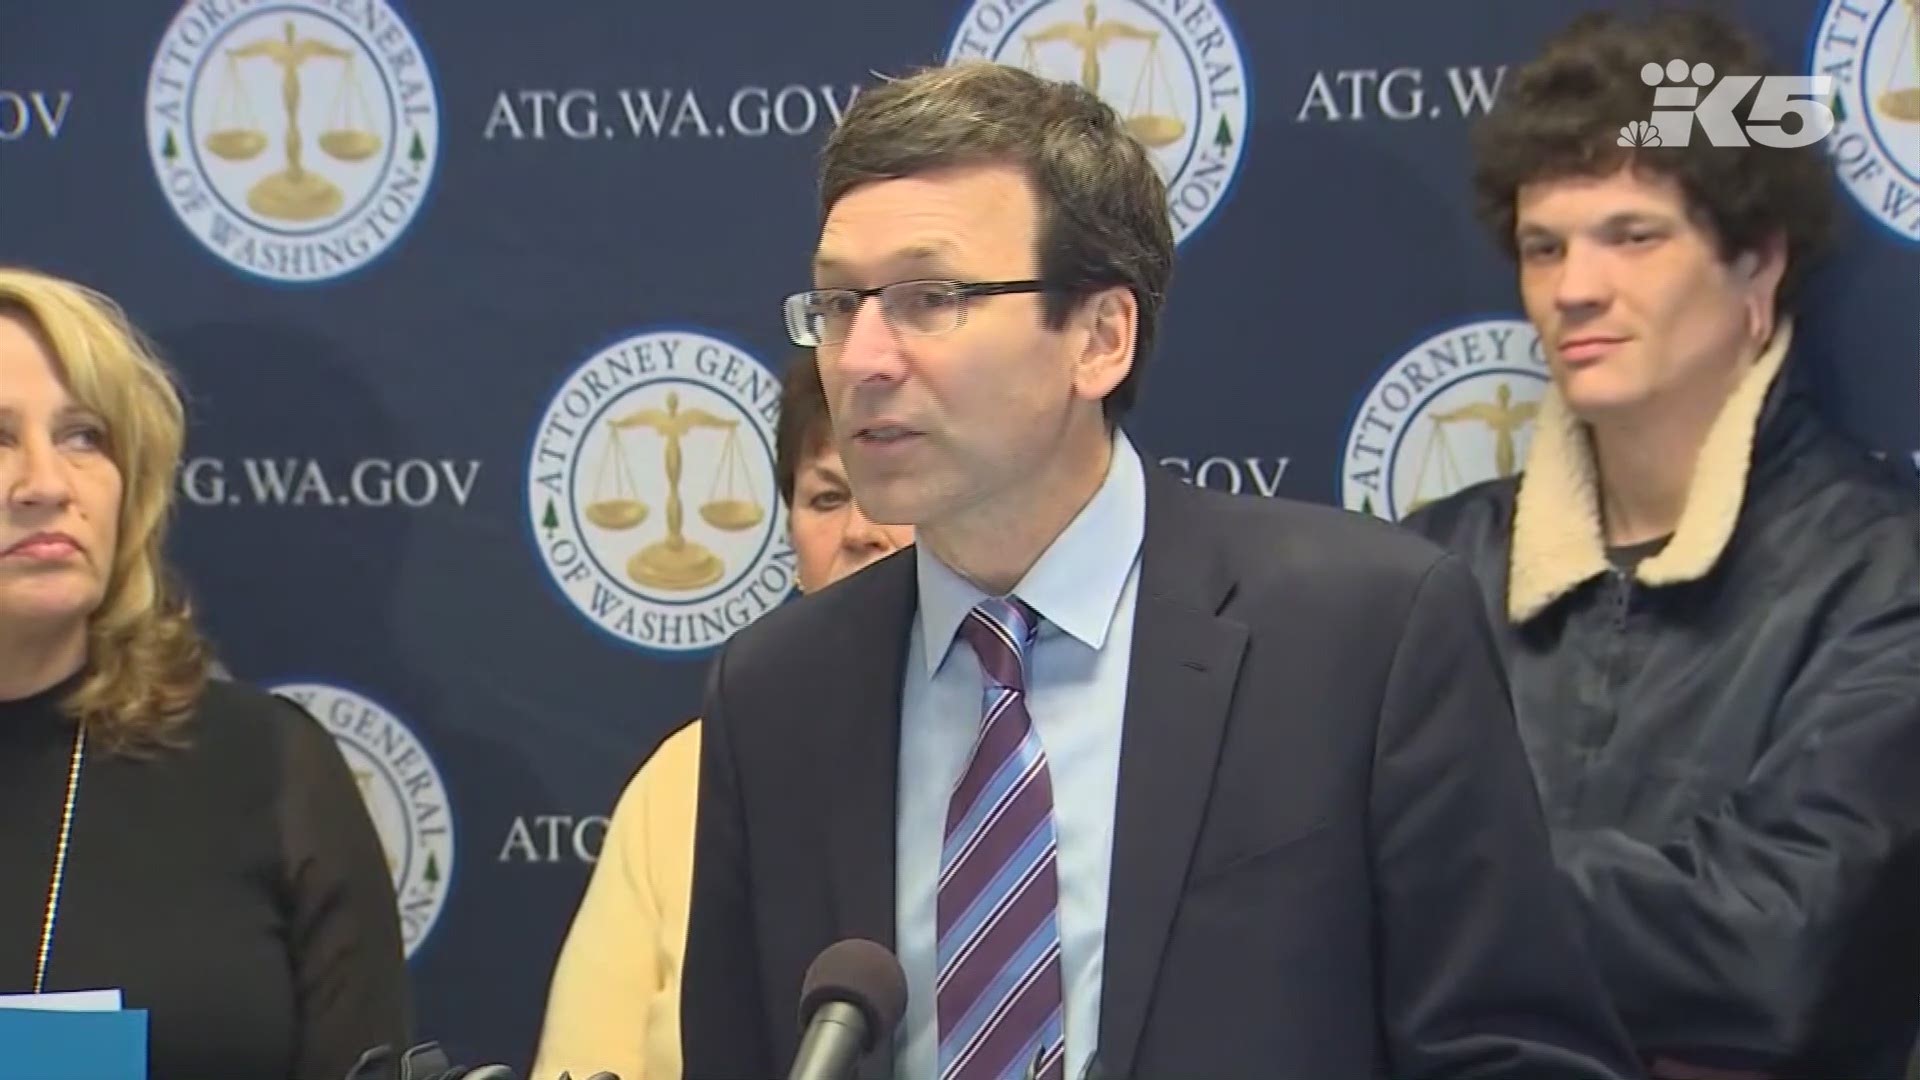 Washington State Attorney General Bob Ferguson says the distributors were "driven by greed" allowing far too many opioid painkillers to flow into the state.